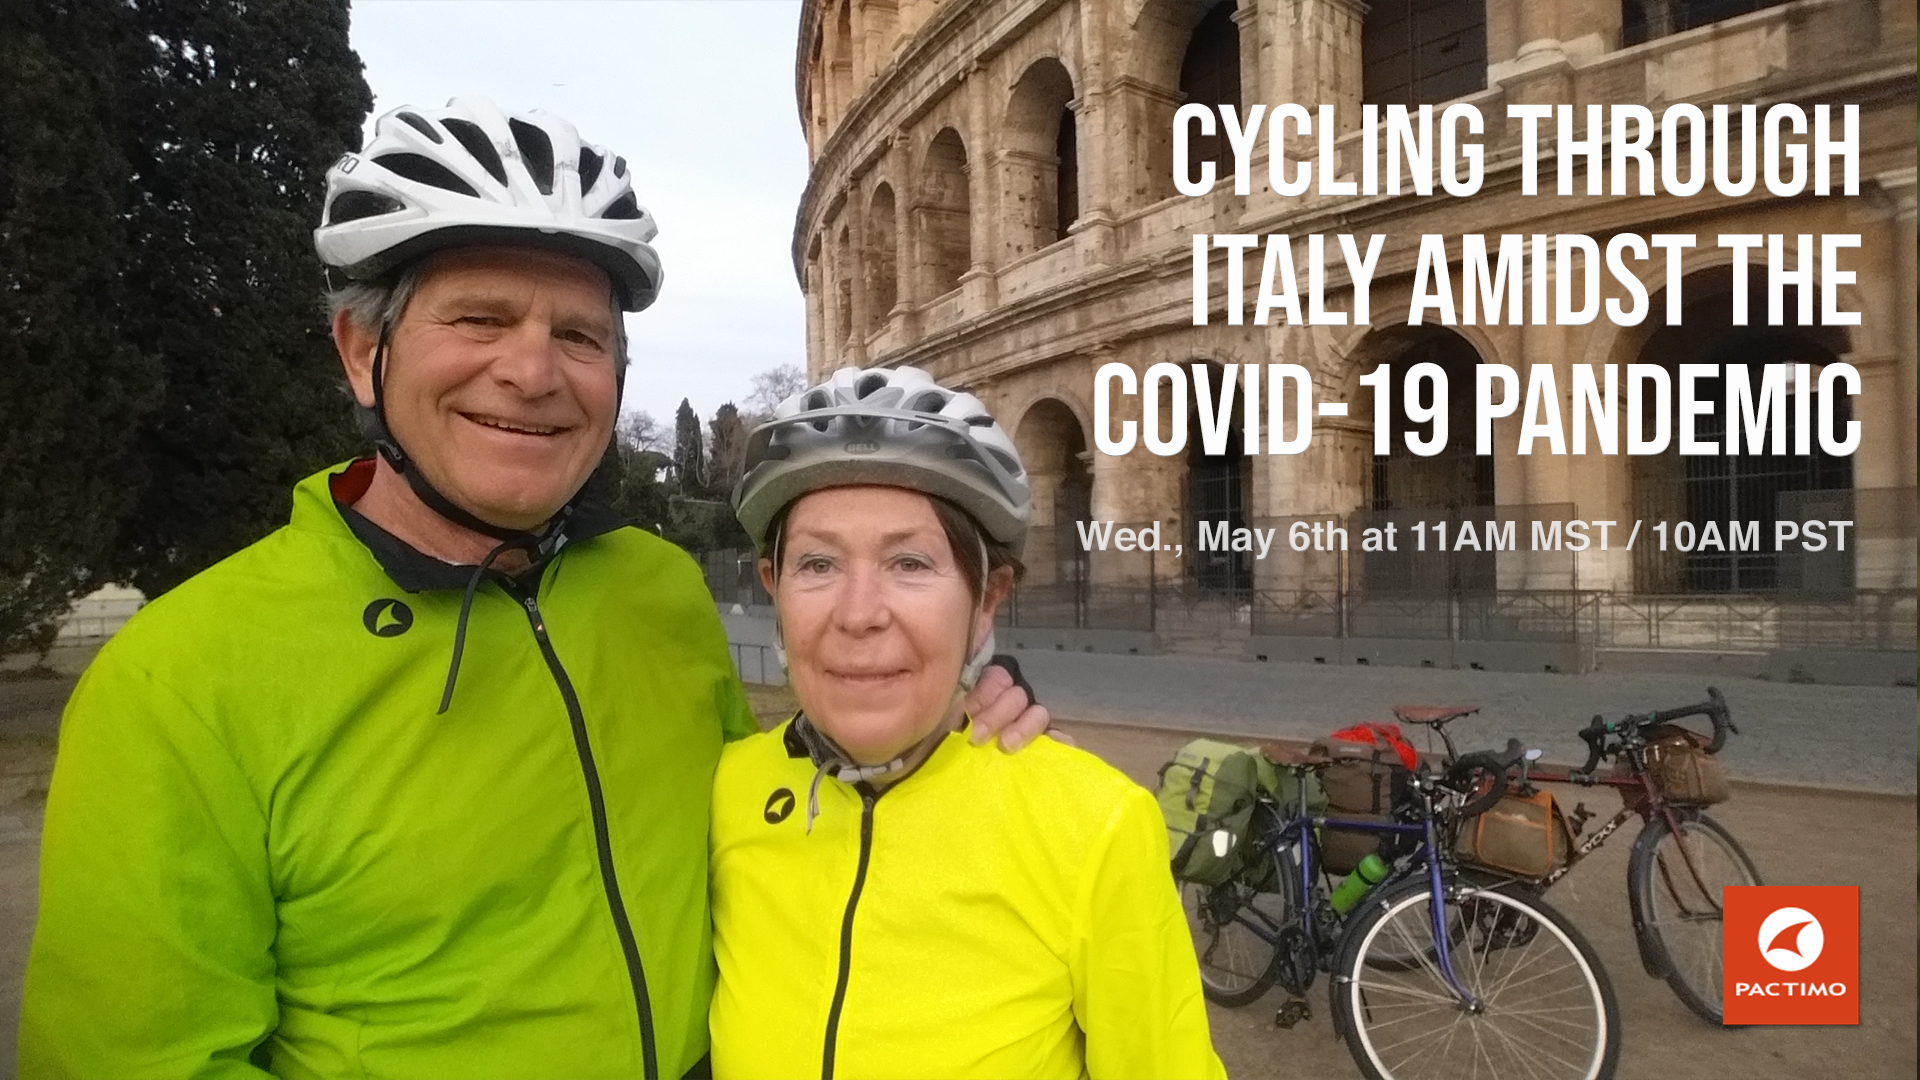 Cycling Through Italy During COVID-19